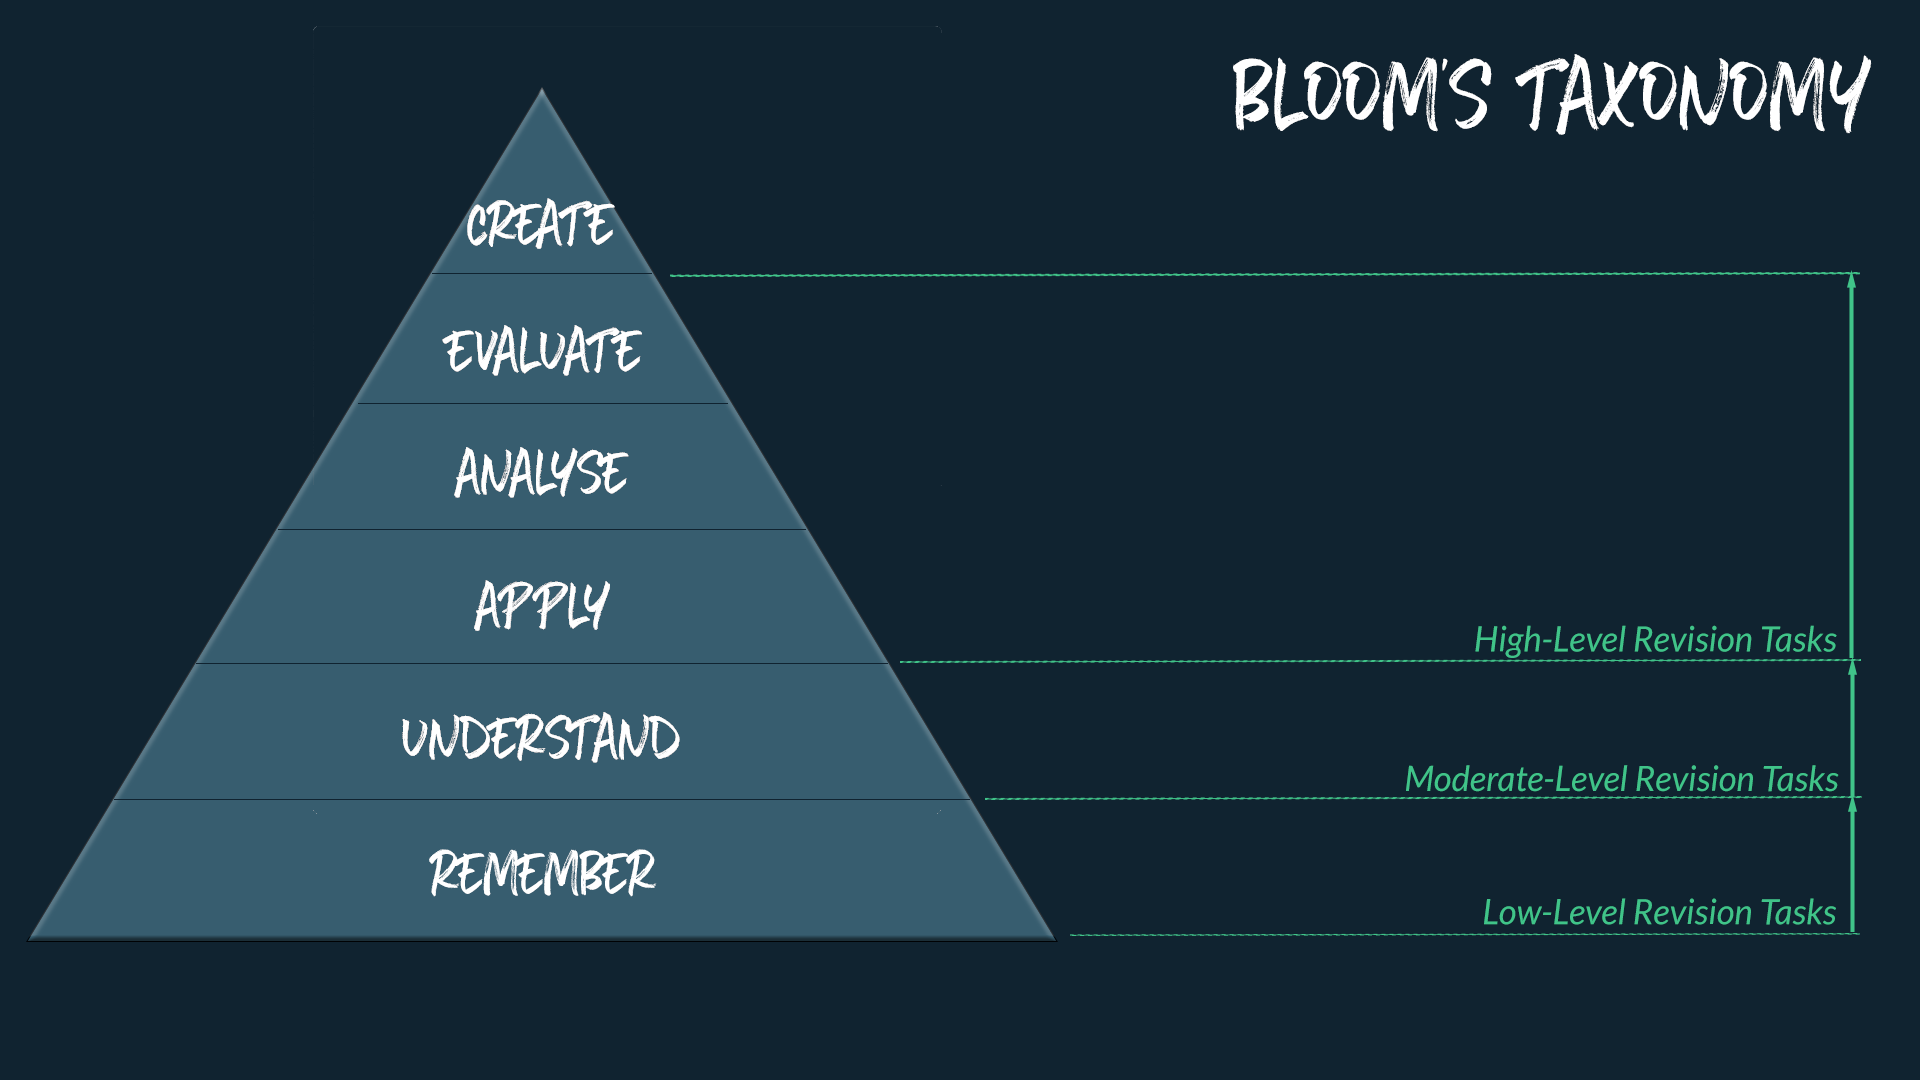 Image showing Bloom's Taxonomy of learning